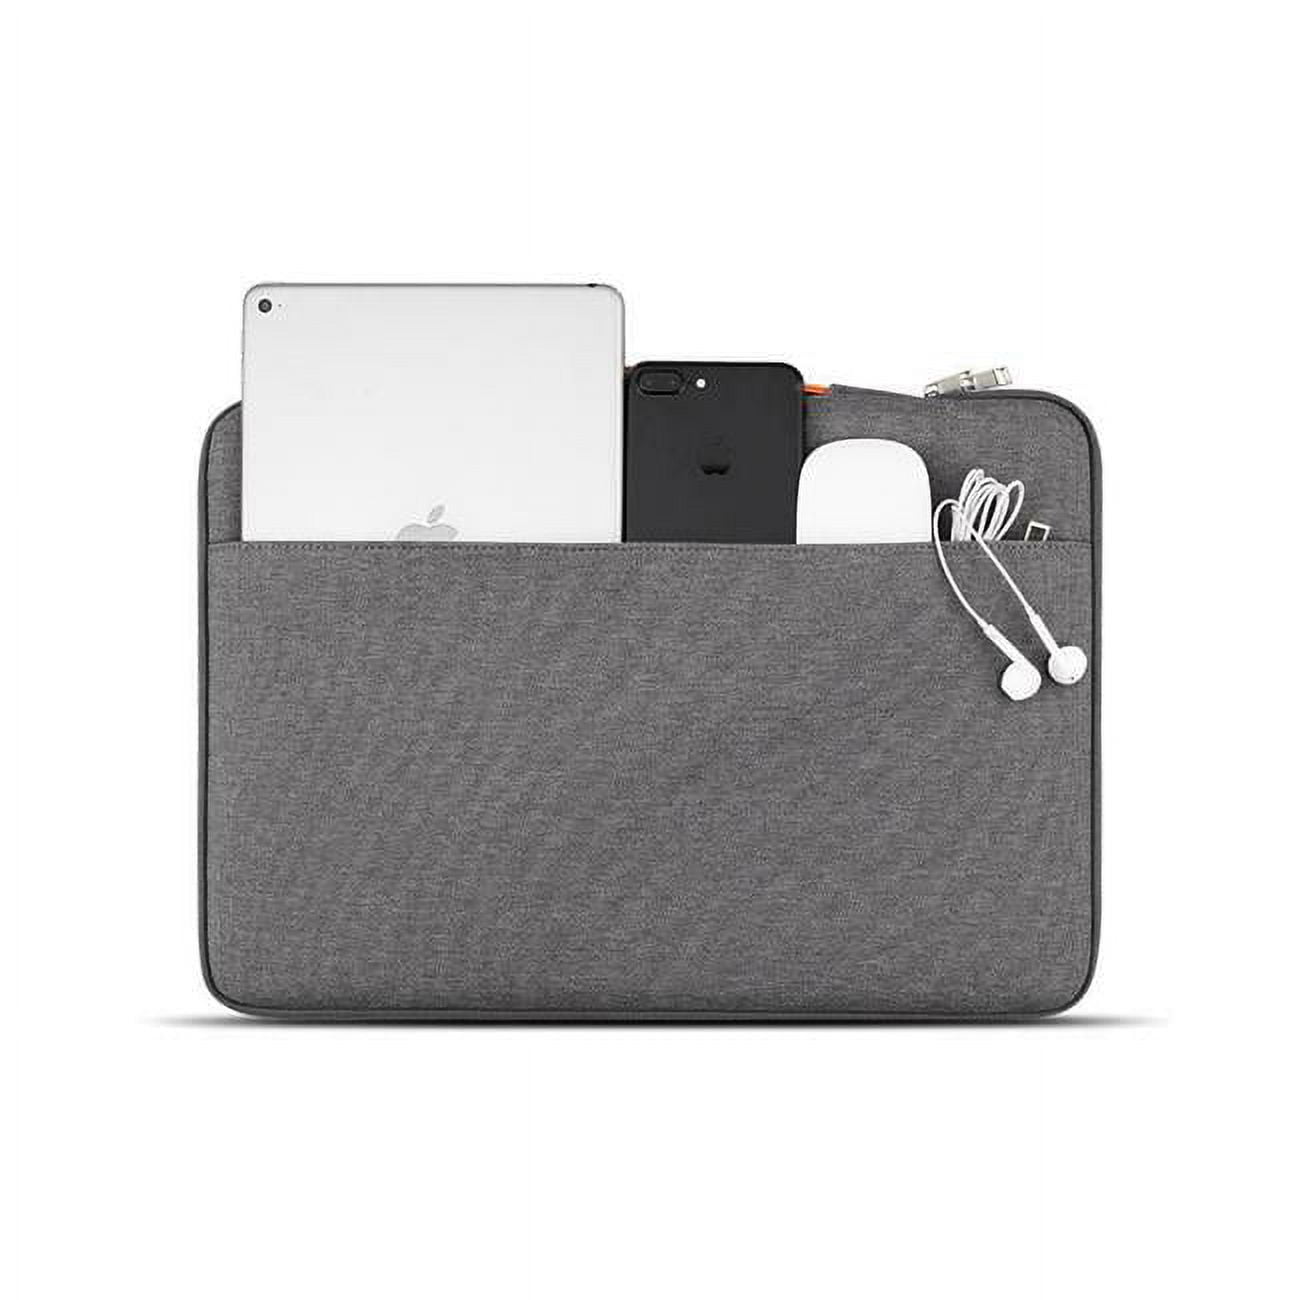 Picture of JCPal JCP2274 15-16 in. Professional Style Sleeve for laptop, Gray